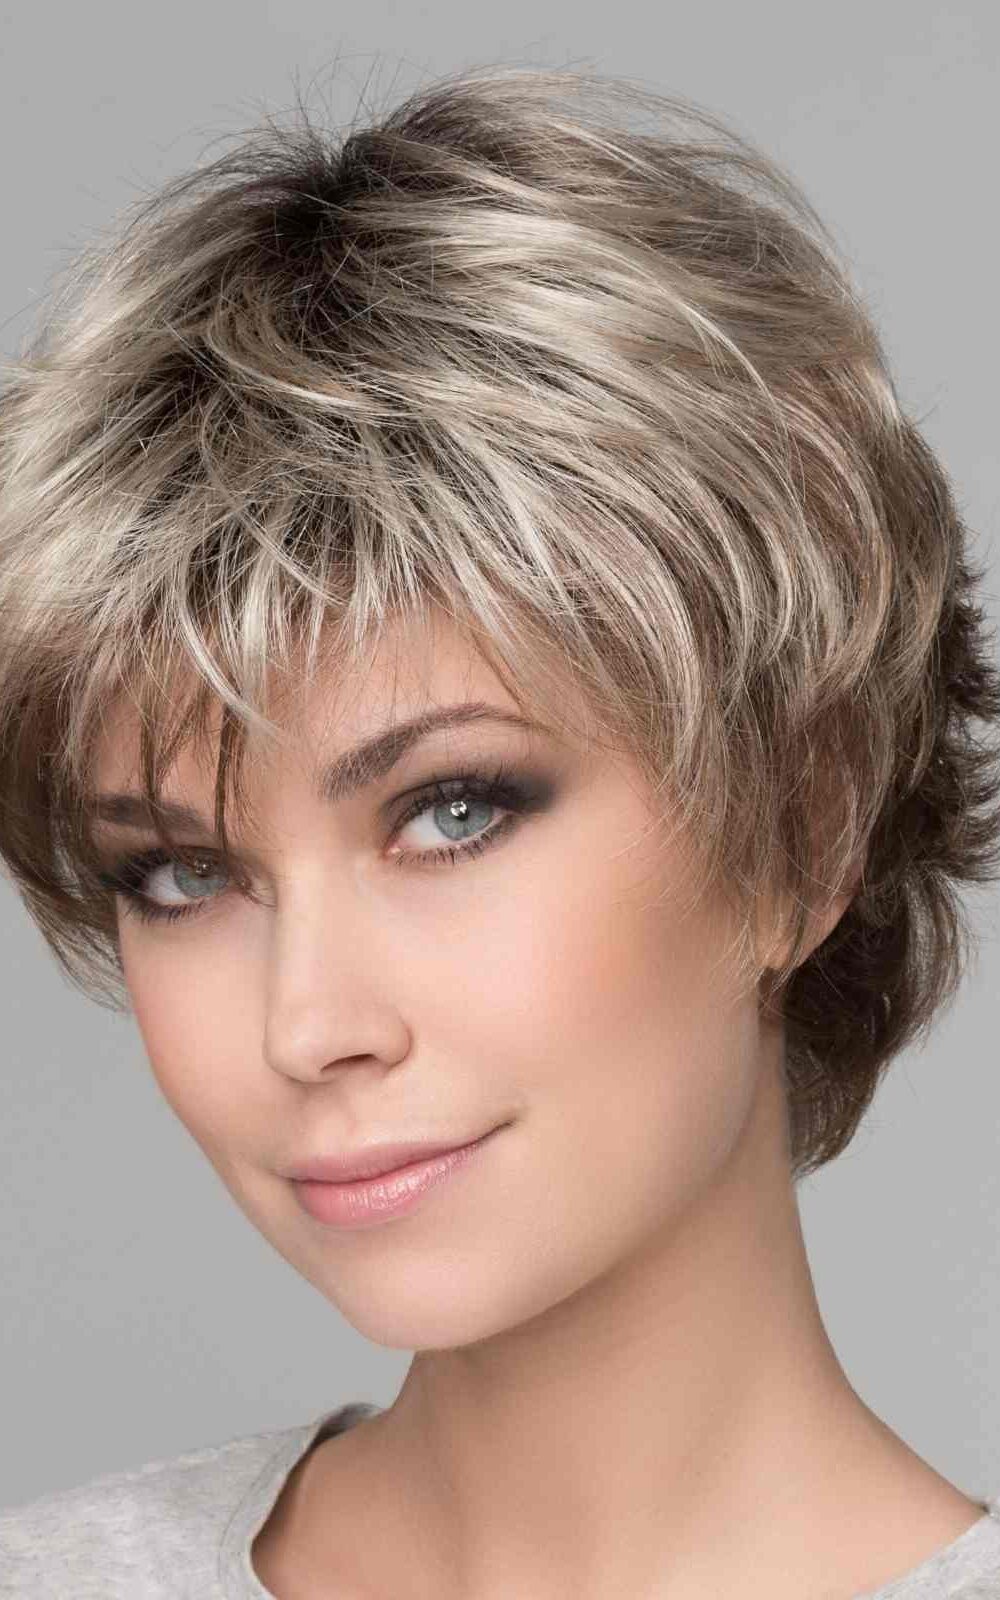 Club 10 Wig by Ellen Wille | Short Synthetic Wig | Colour Sand Multi Rooted | Elly-k.com.au